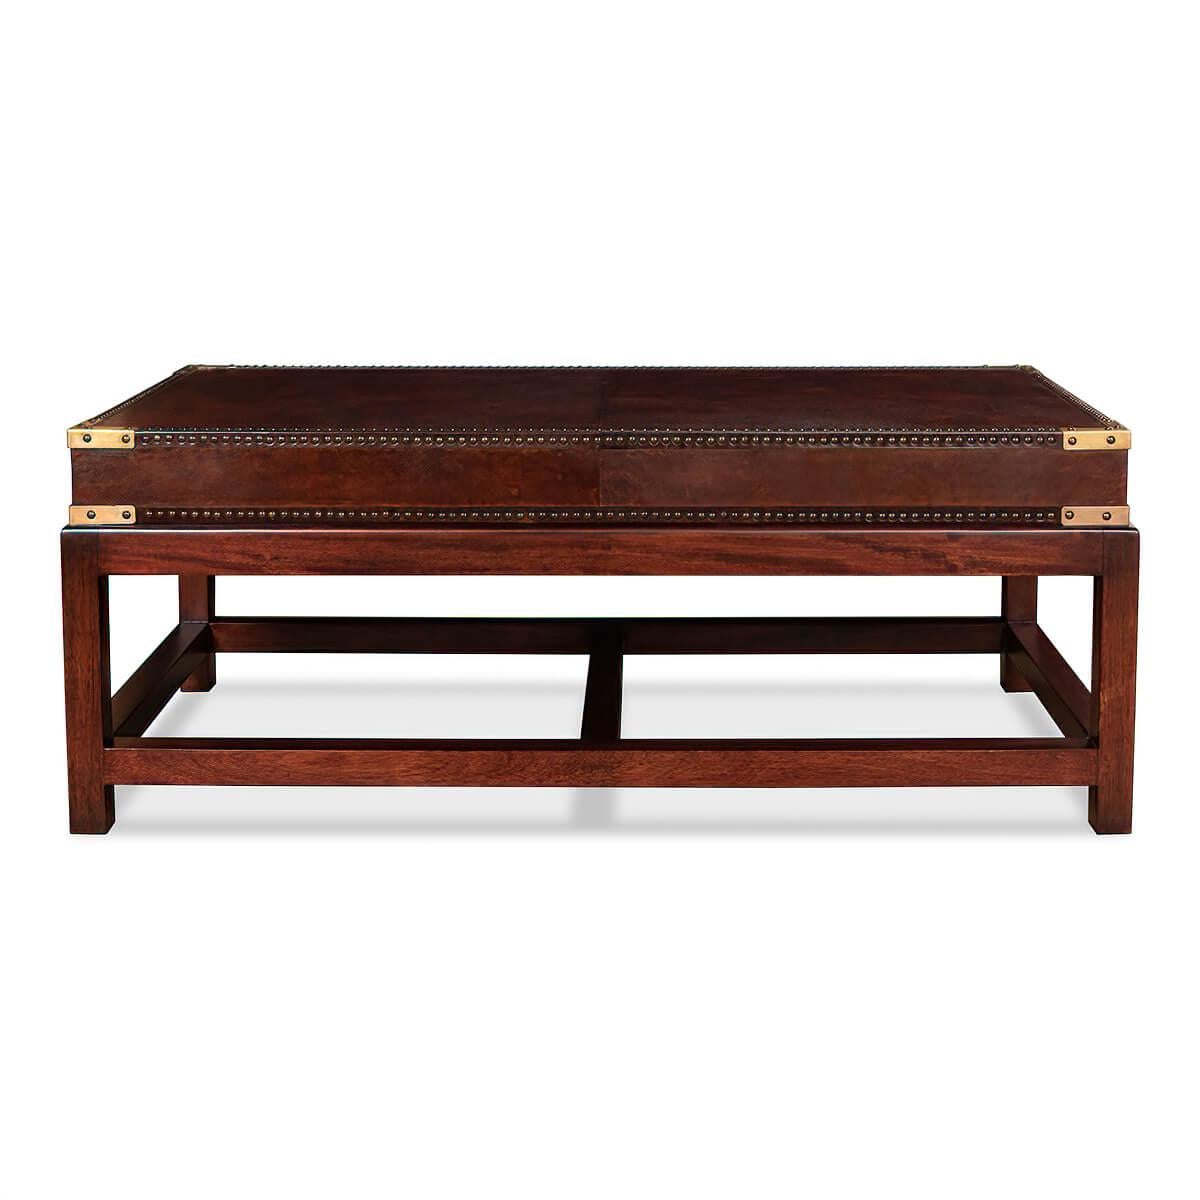 A Campaign form leather wrapped coffee table with an antiqued brown leather, brass-bound corners, and nailhead trim details, raised on a George III style H form stretcher base.

Dimensions
48